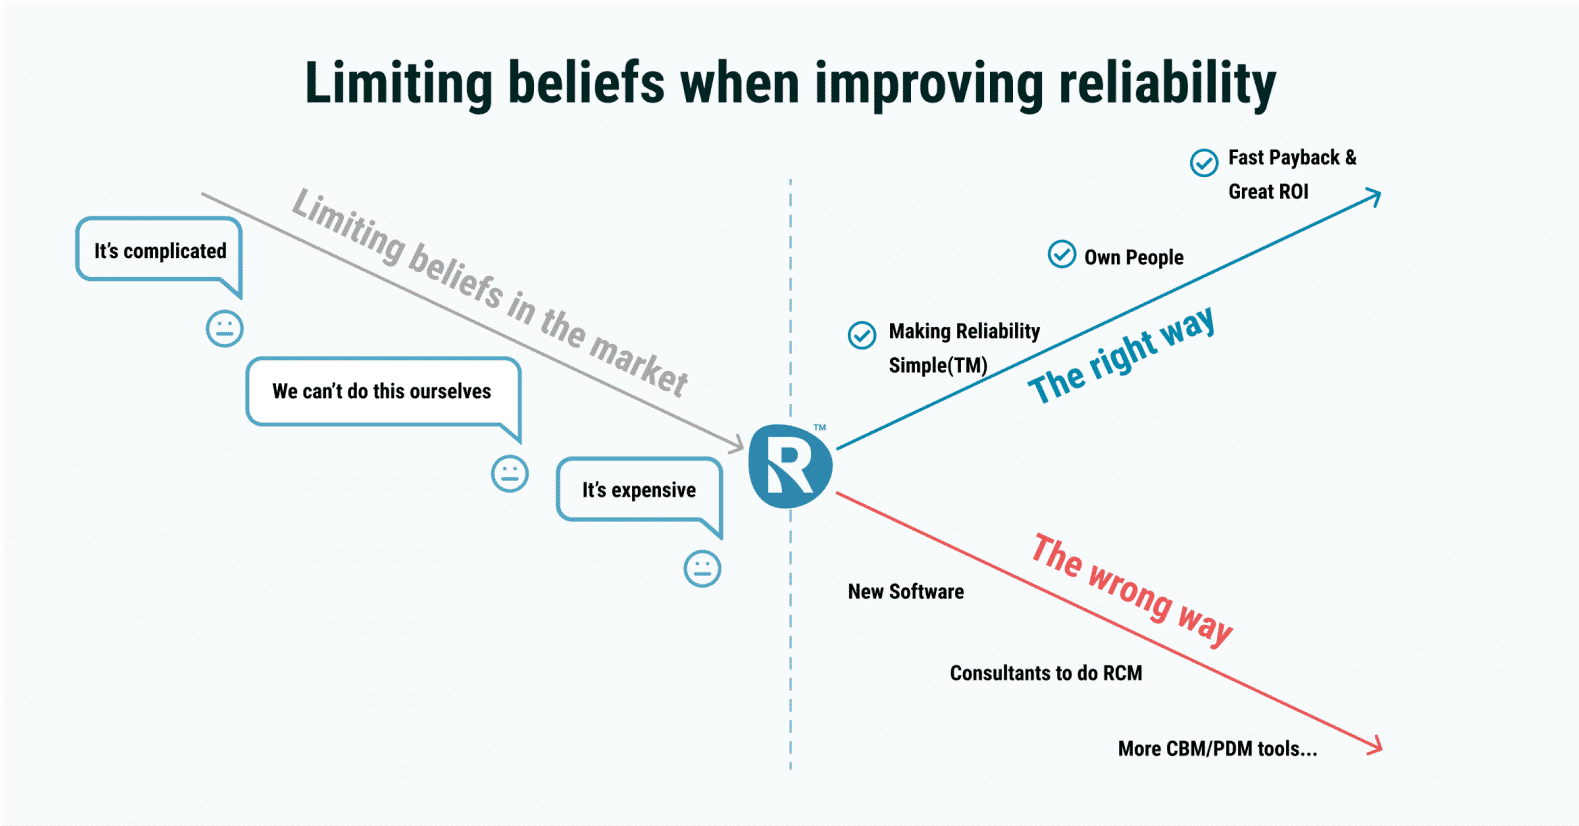 Limiting beliefs when improving reliability